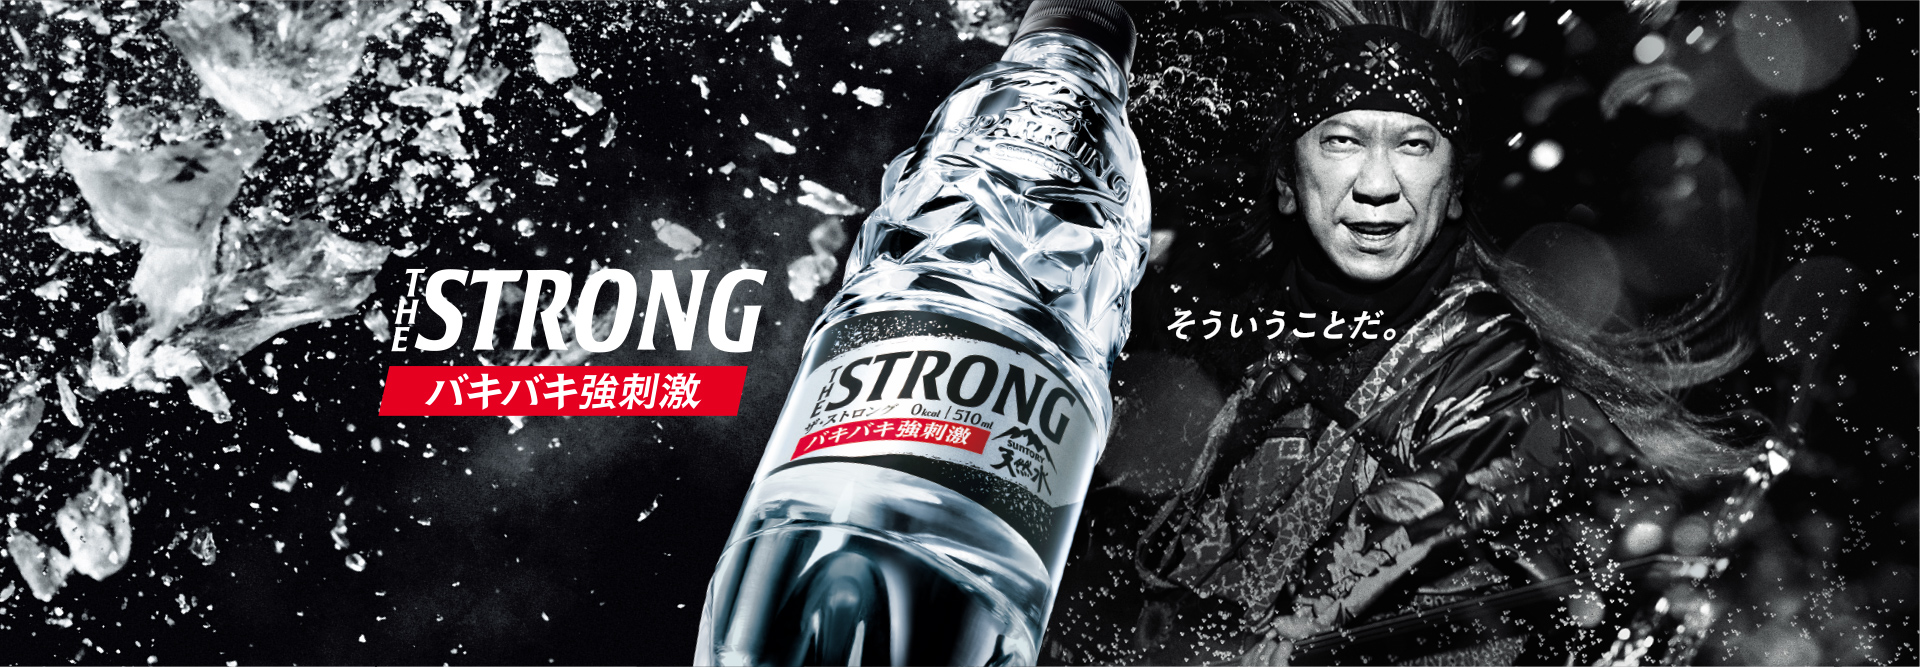 THE STRONG 天然水スパークリング｜サントリー天然水